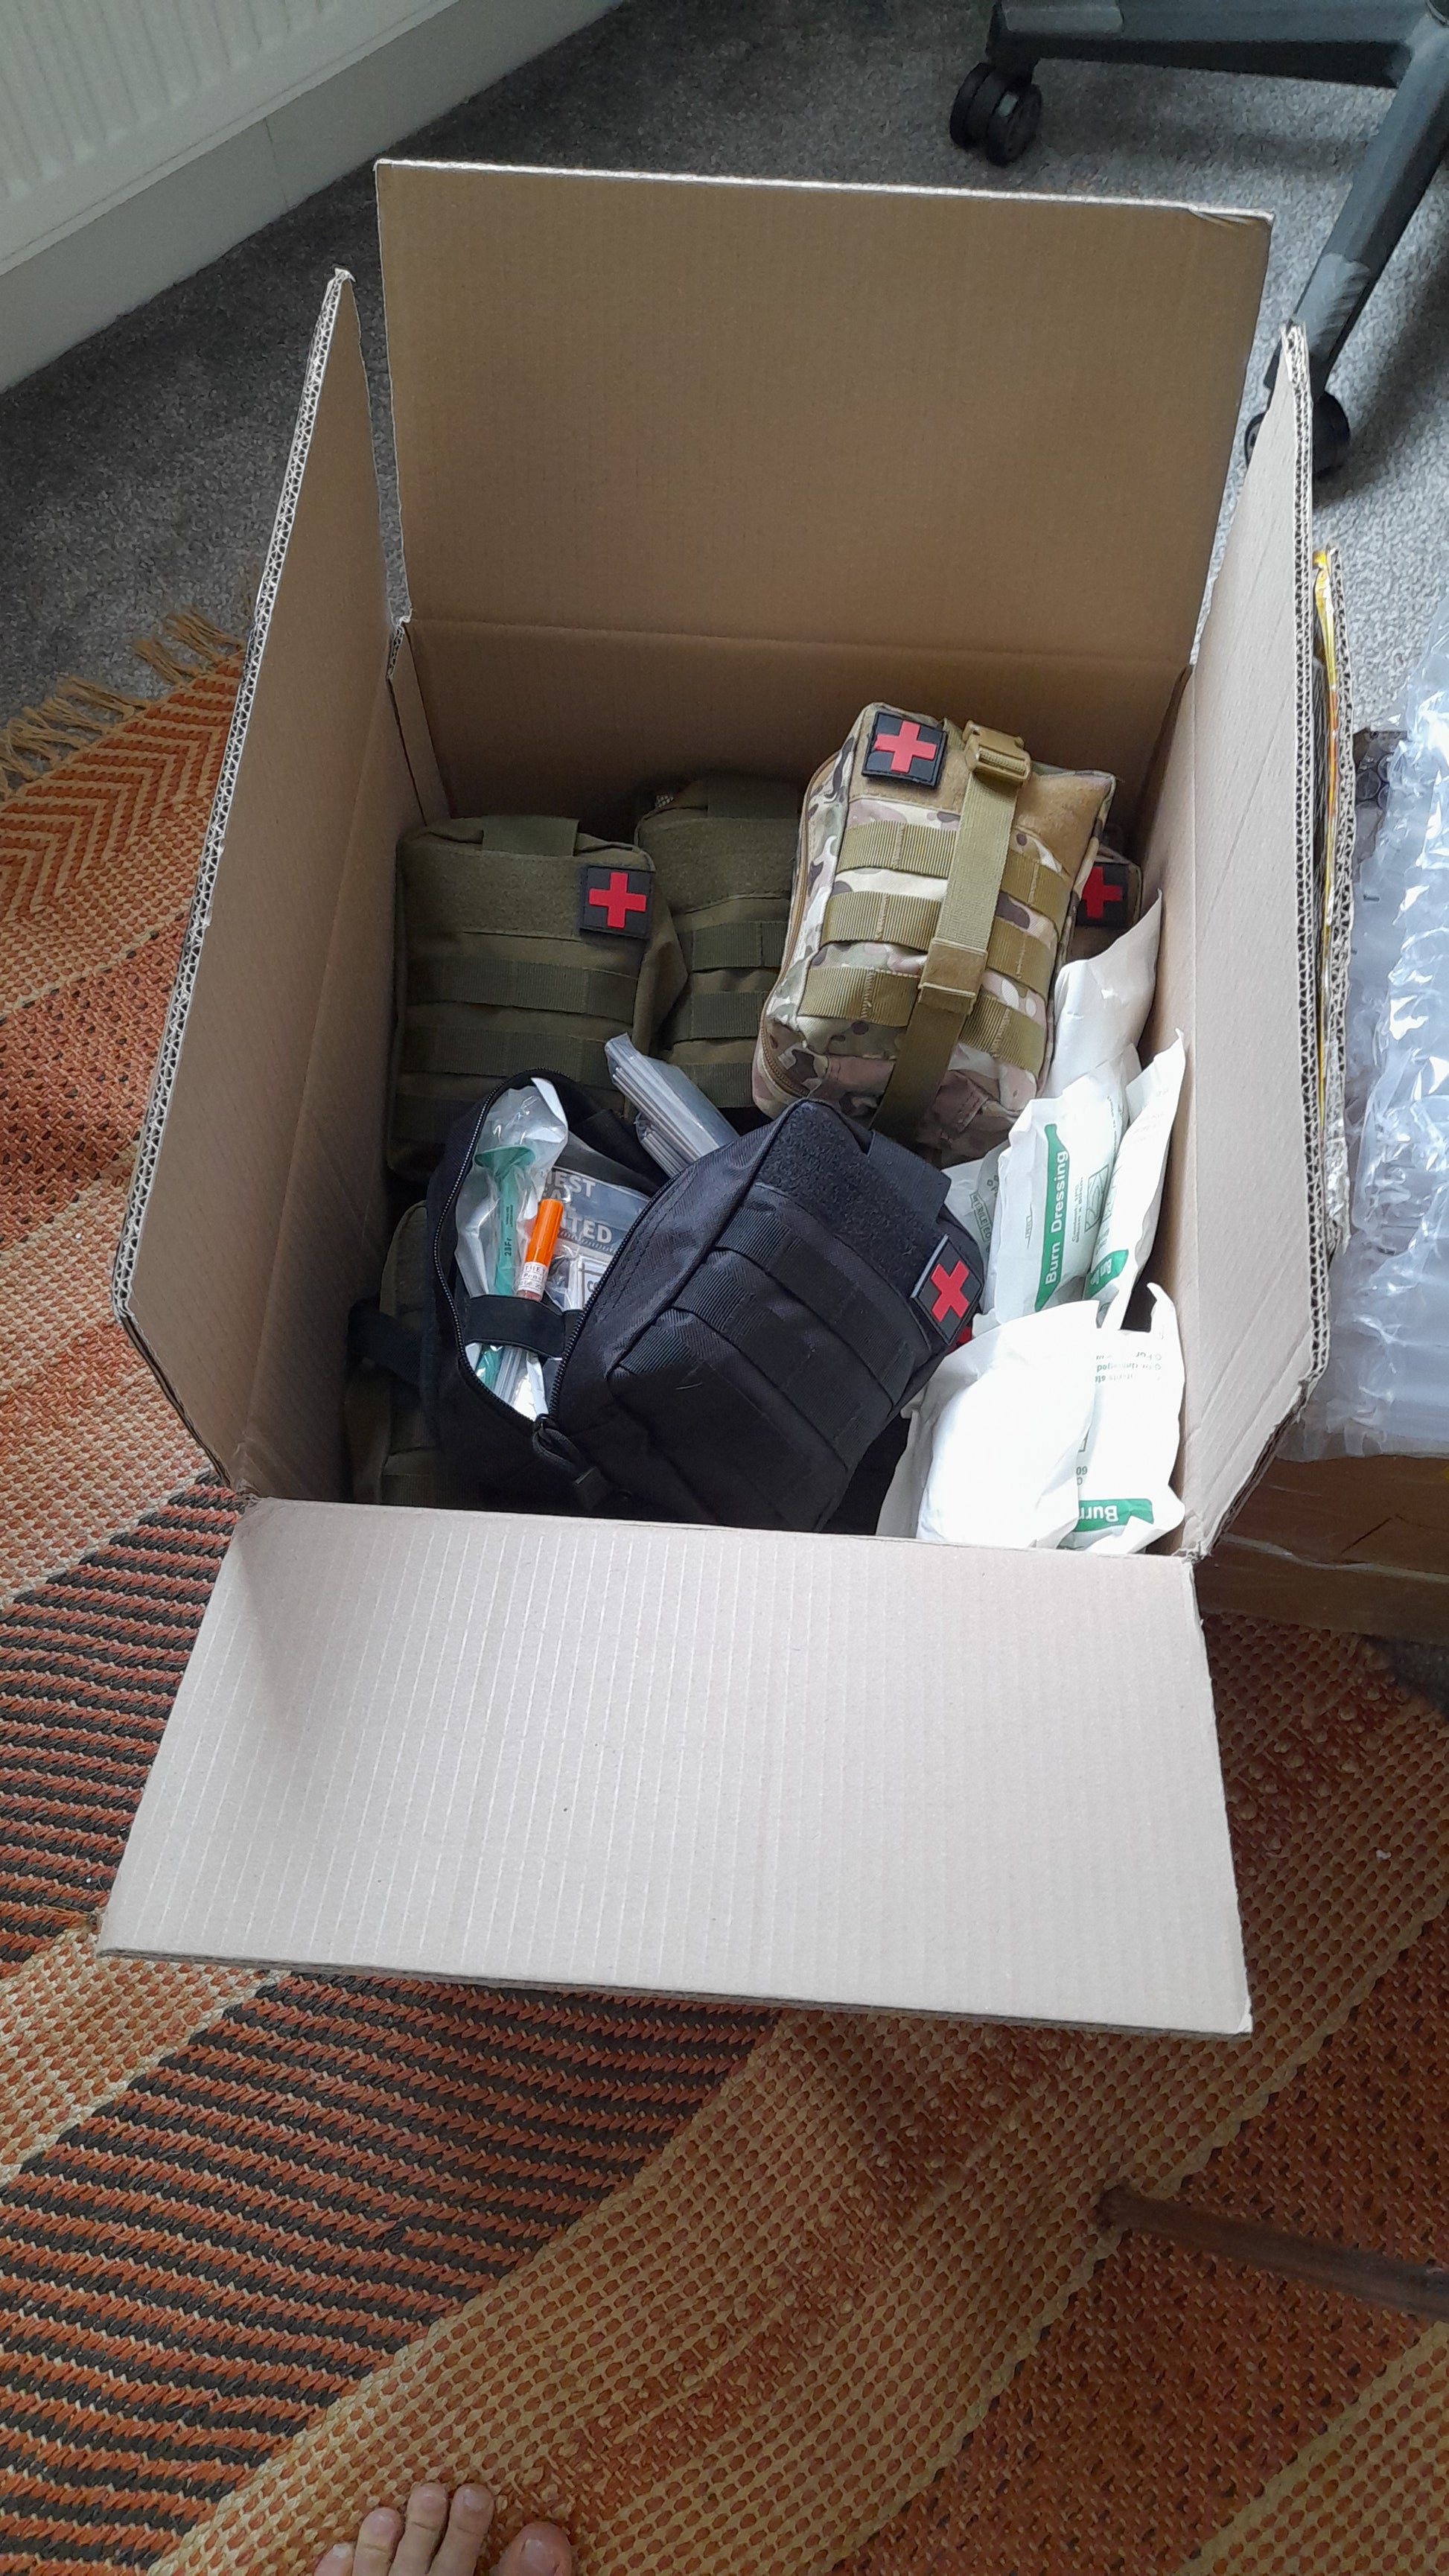 TFAK Special forces combat team wound trauma bespoke medical kit MADE IN THE UK - IWMD-Store SECUTOR ARMOUR